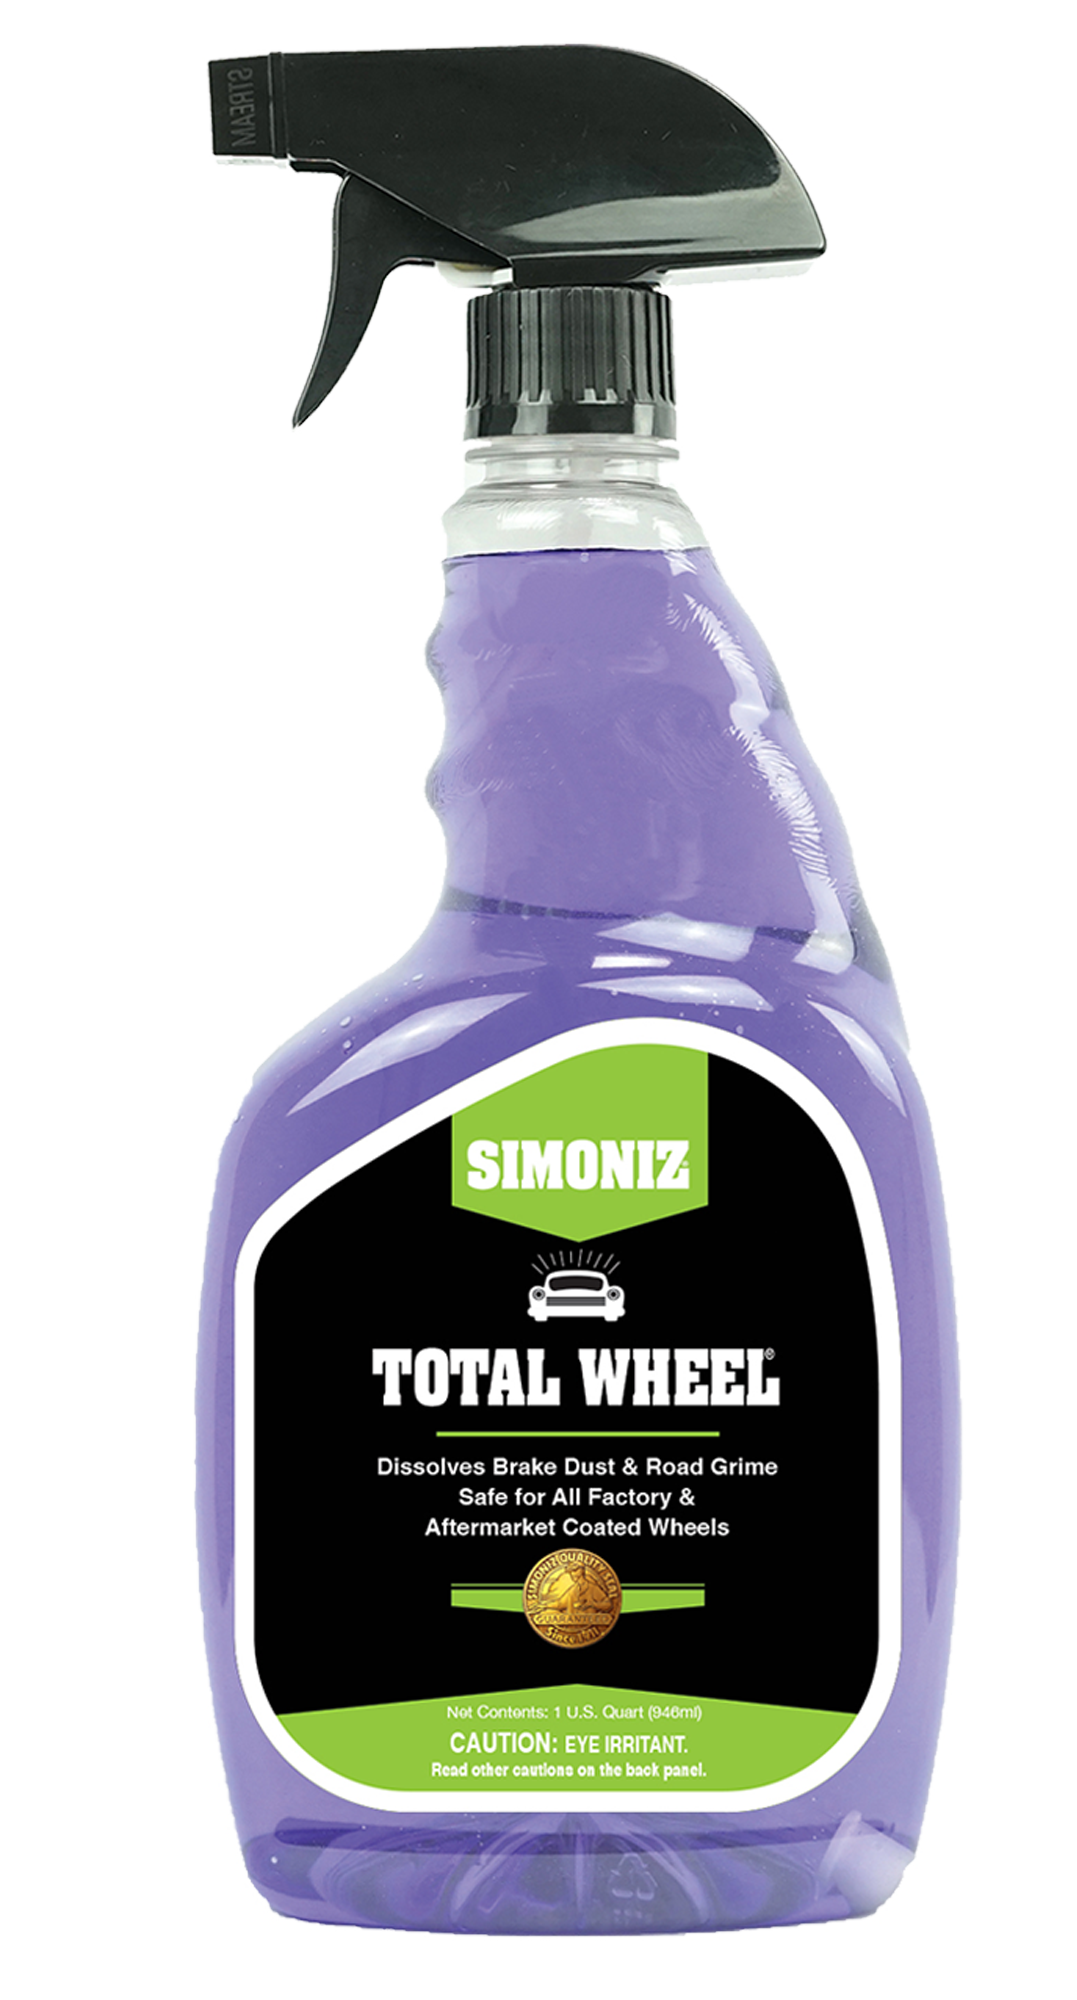 Simoniz Foaming Wheel Cleaner - Wheel Spray Cleaner and The Best Car Wheel  Cleaner - Safe for all Car Wheels, 18 oz by GOSO Direct